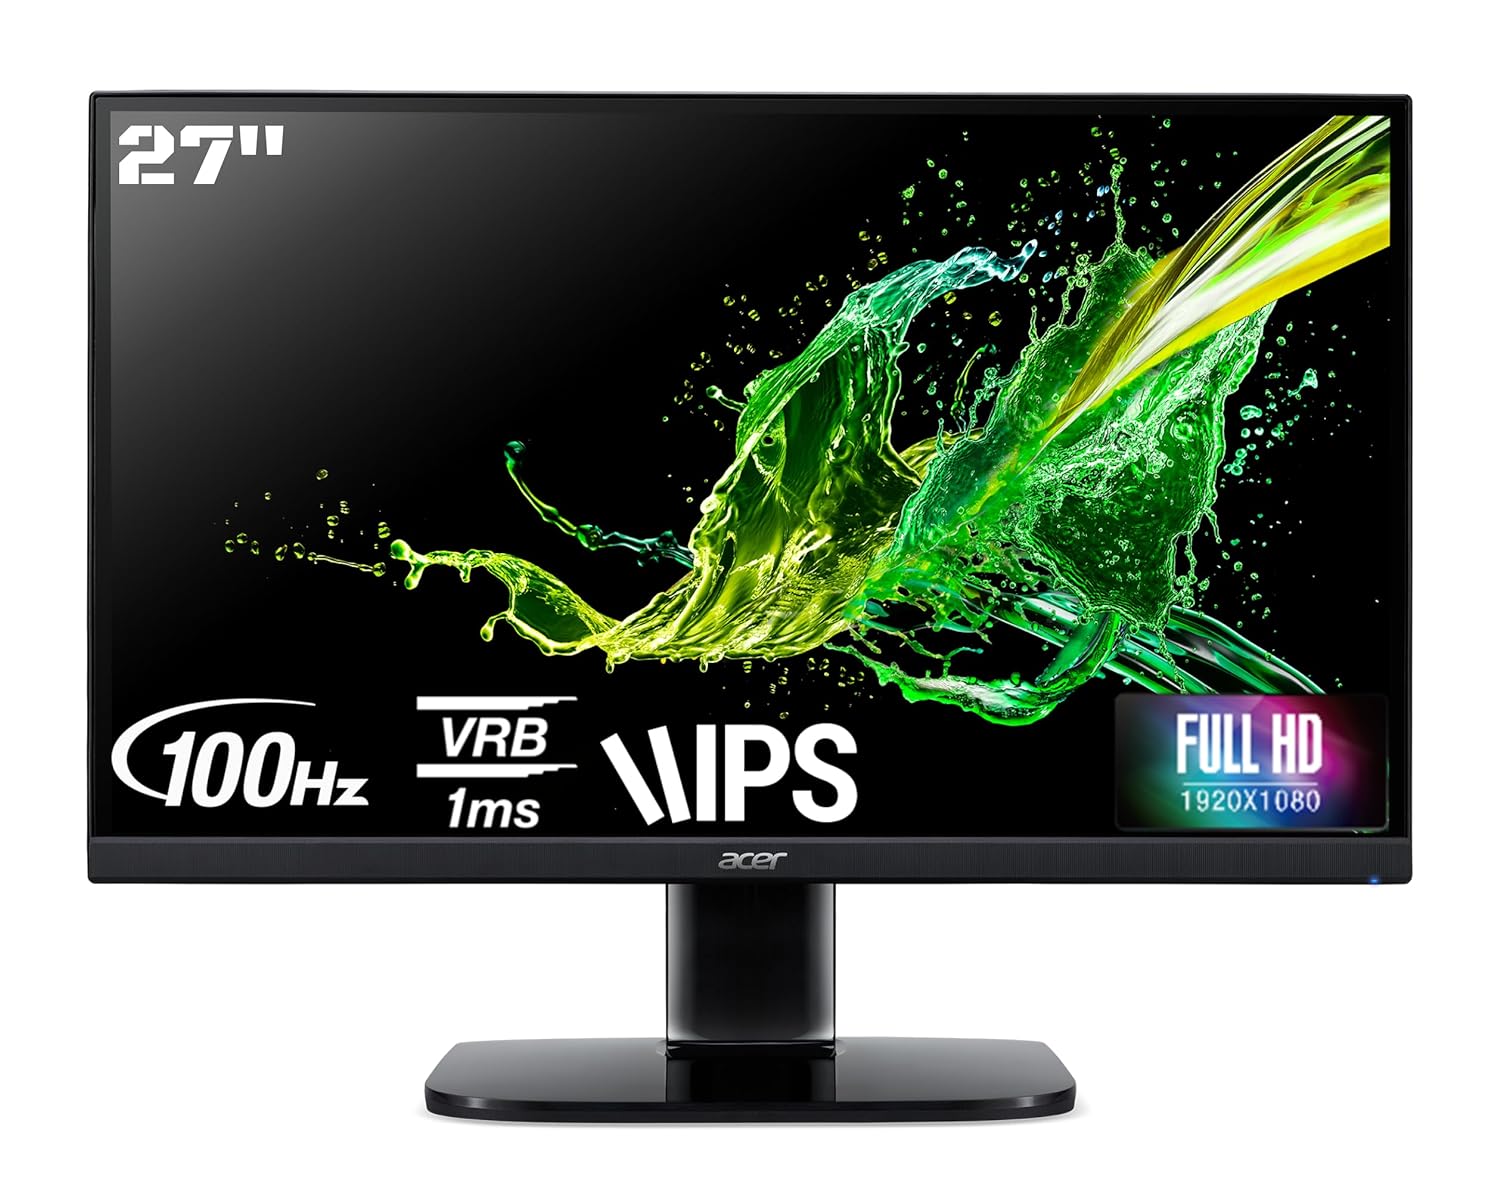 Acer KA270 E 27 Inch IPS Full HD LCD Monitor with LED Back Light I 1MS VRB 100Hz Refresh Rate I AMD Free Sync I Zero Frame Design I 99% sRGB I 1 x VGA 1 x HDMI with Inbox HDMI Cable I Eye Care Feature